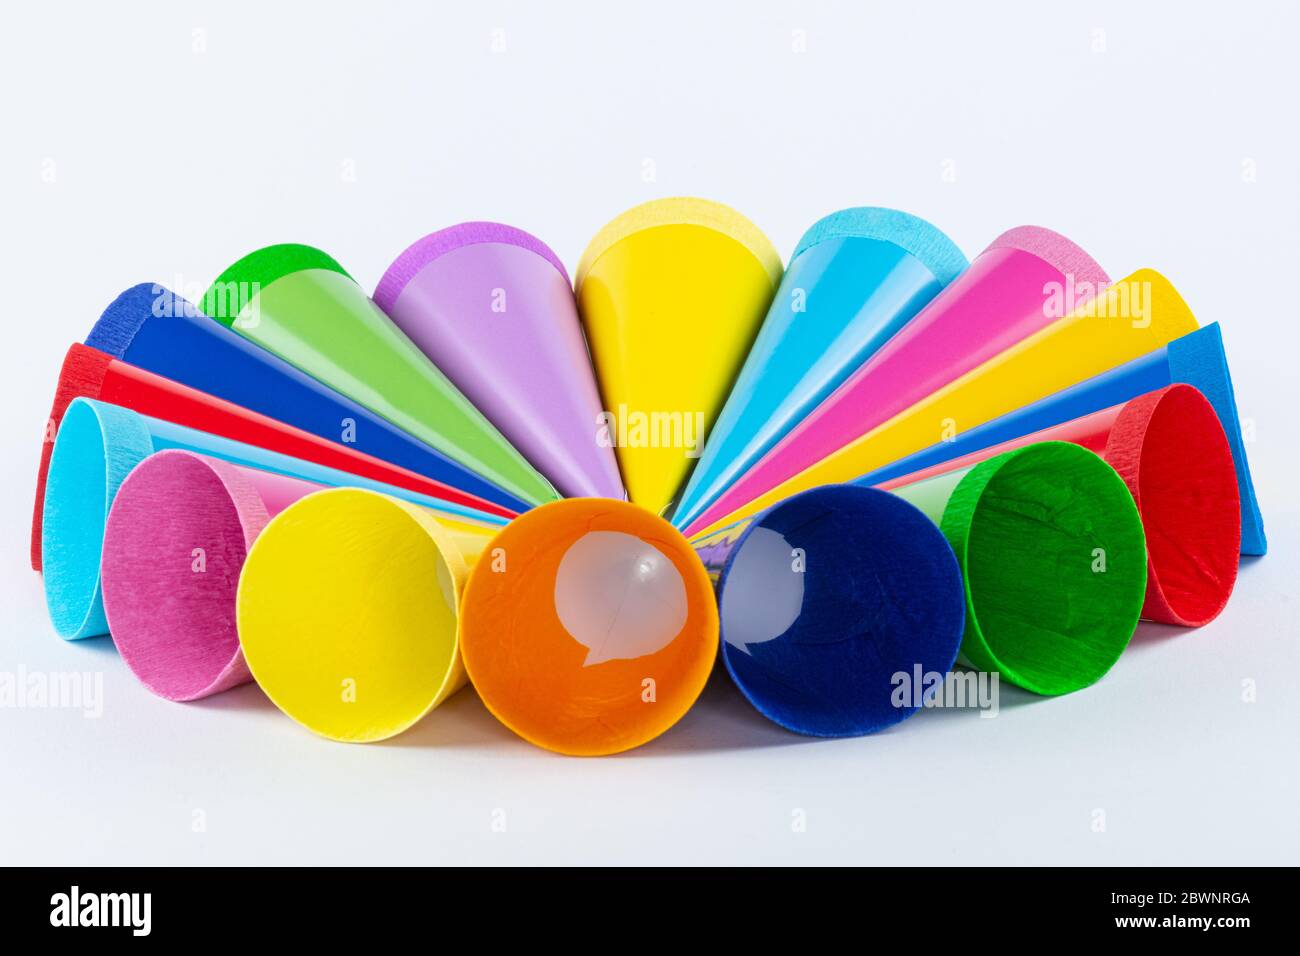 Many colorful small sugar bags arranged in a circle on a light background Stock Photo